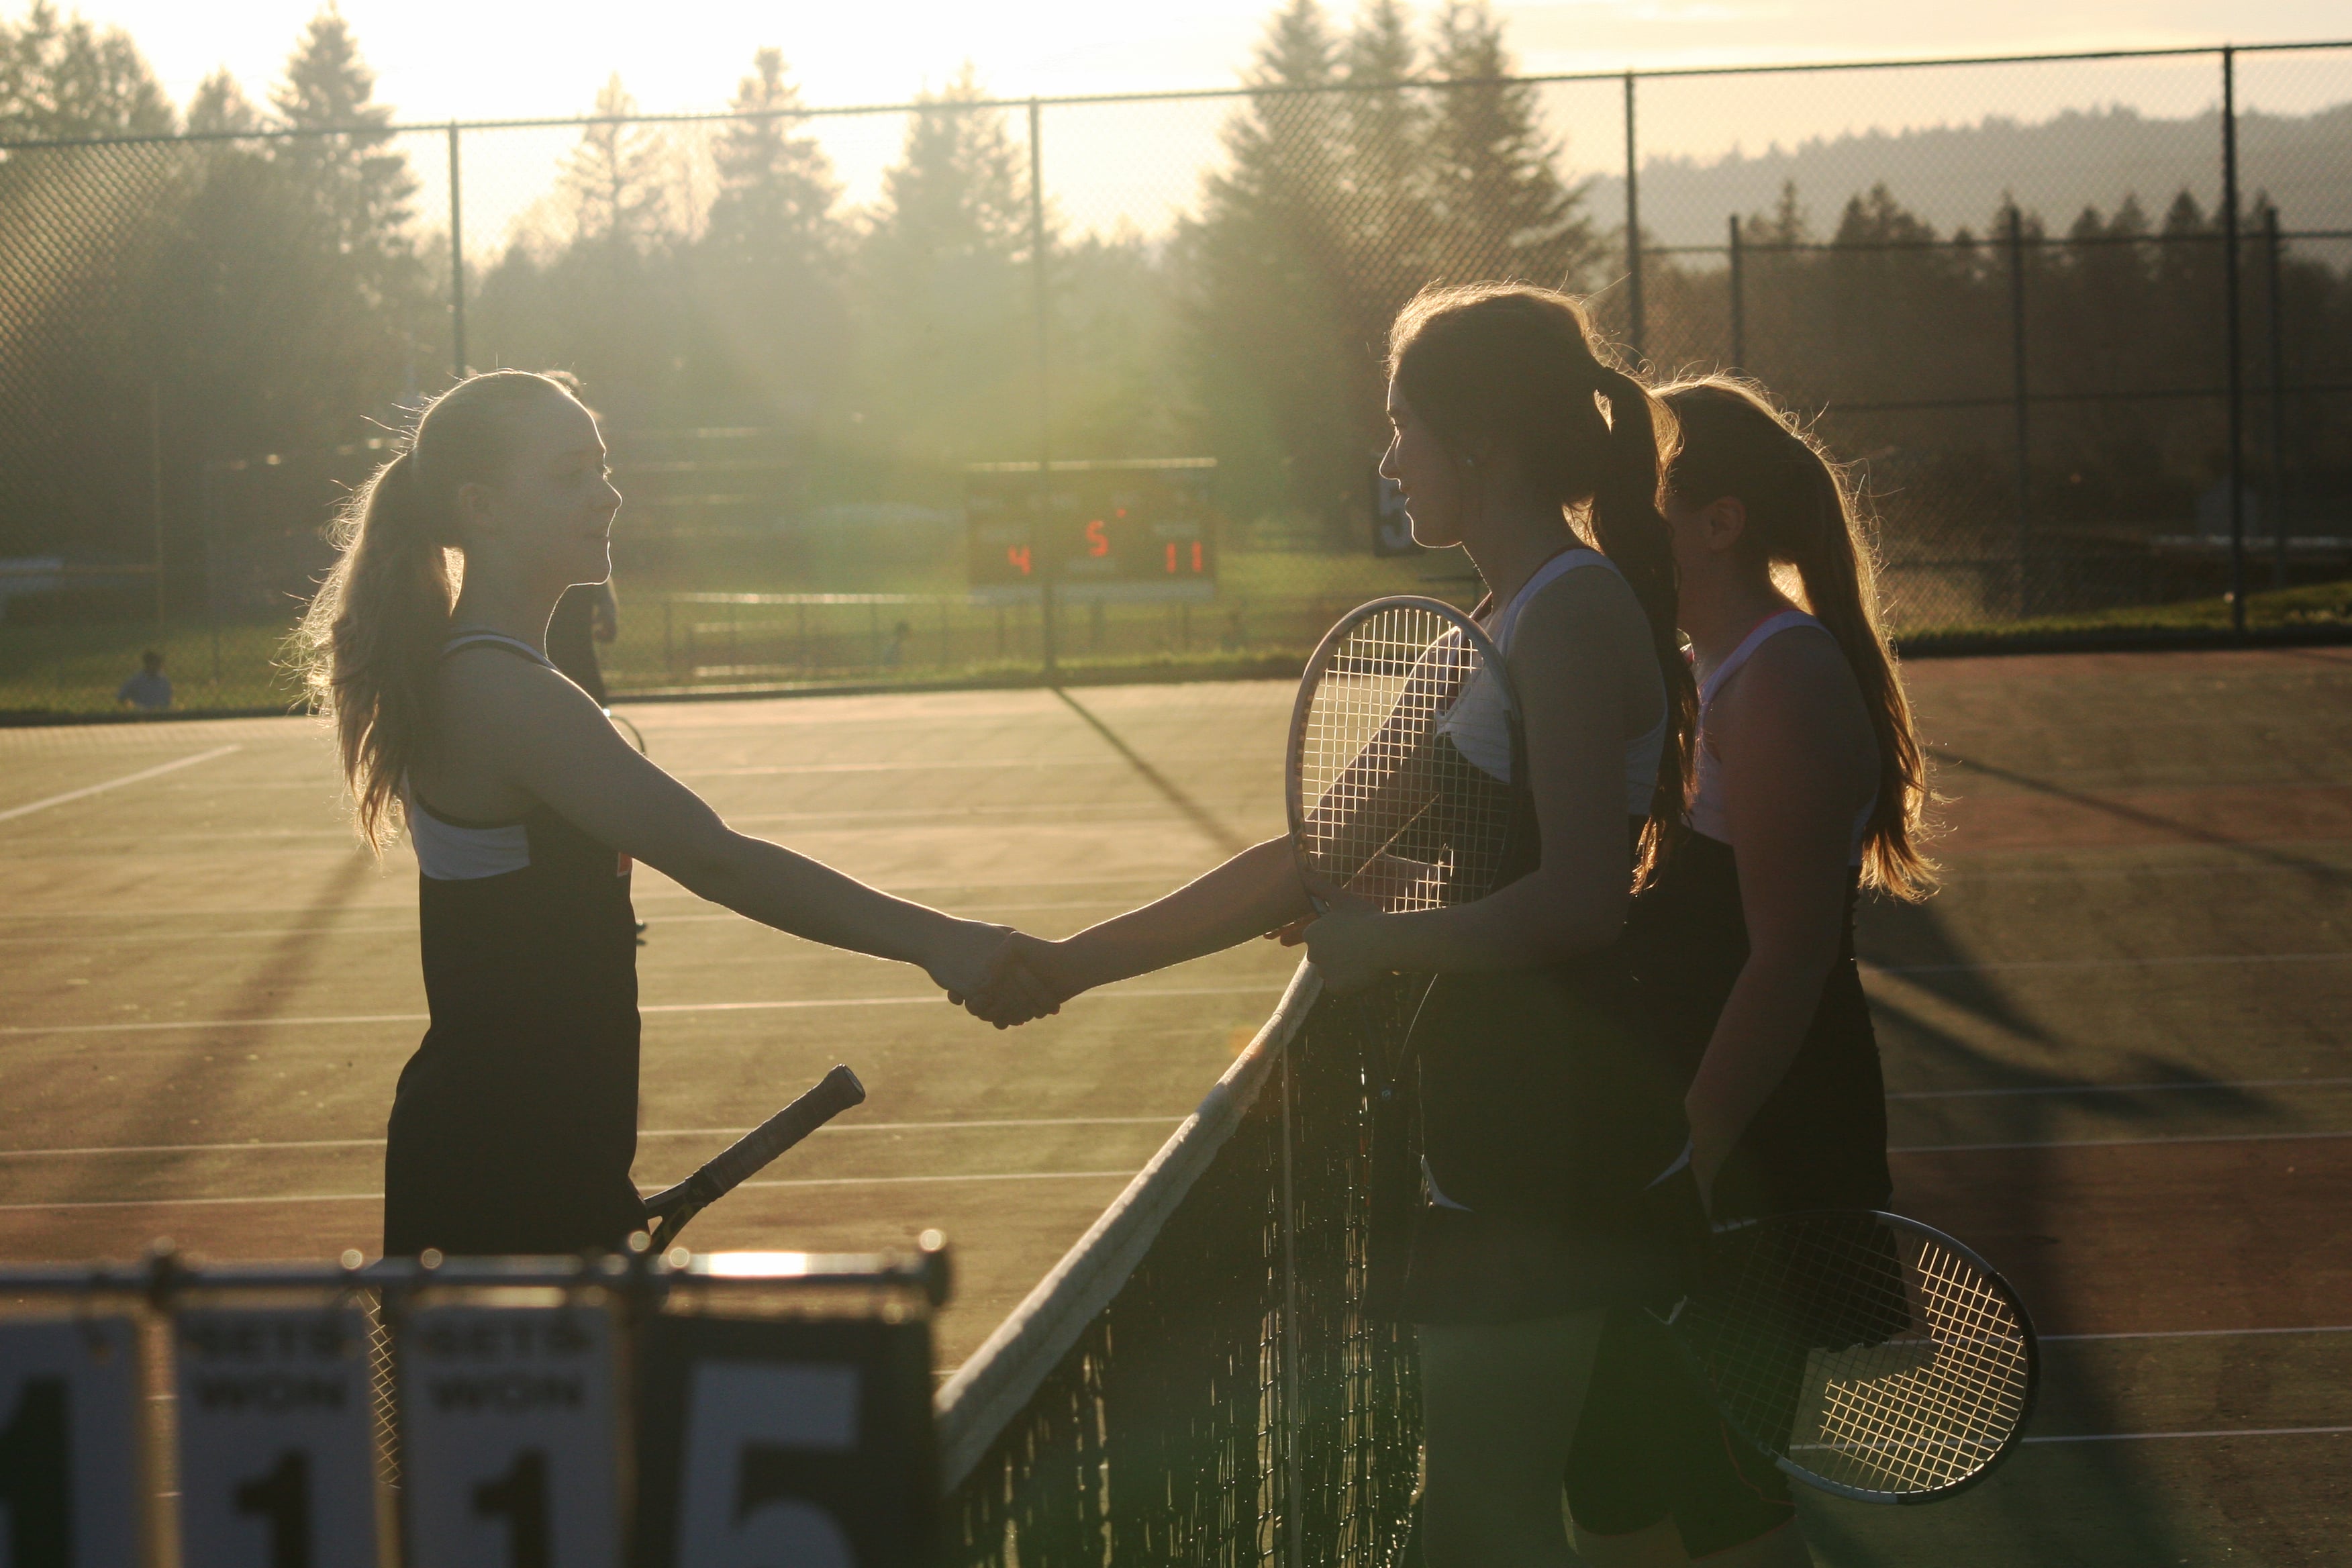 Sun sets on another memorable Camas-Washougal tennis match. This is the only sport the two neighboring towns played against each other this school year.